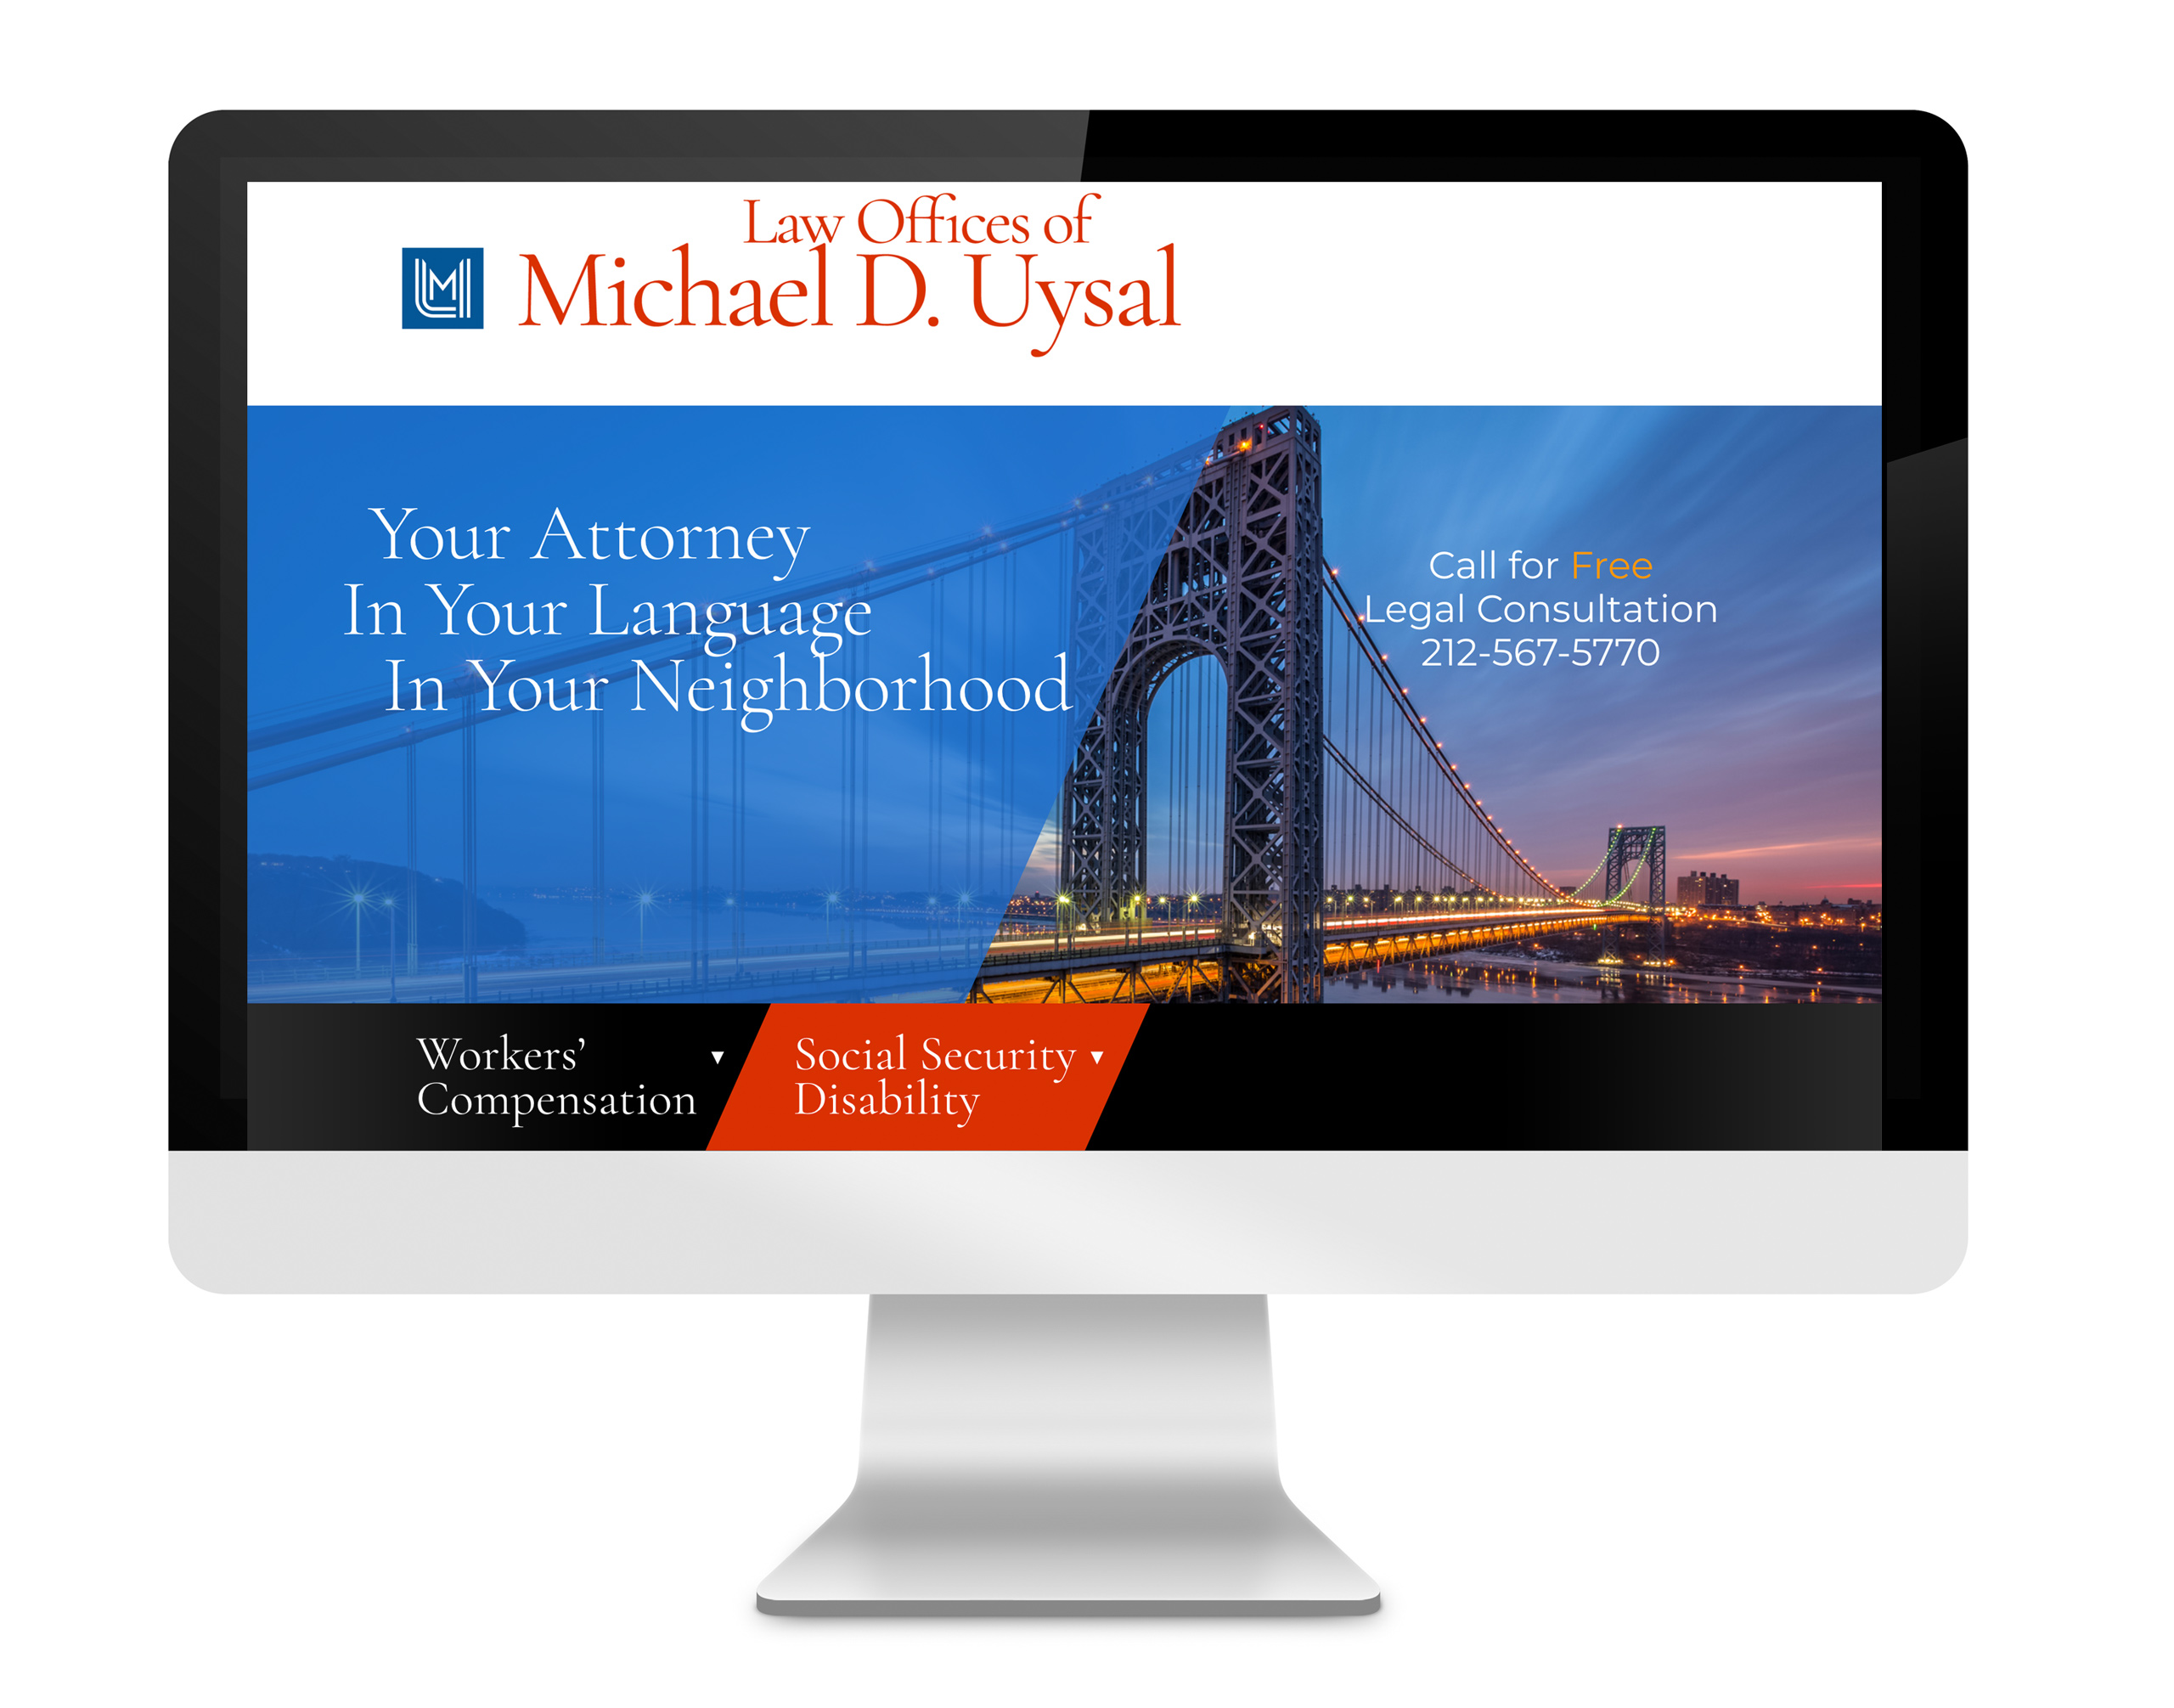 Law Offices of Michael D. Uysal website designed by DLS Design.